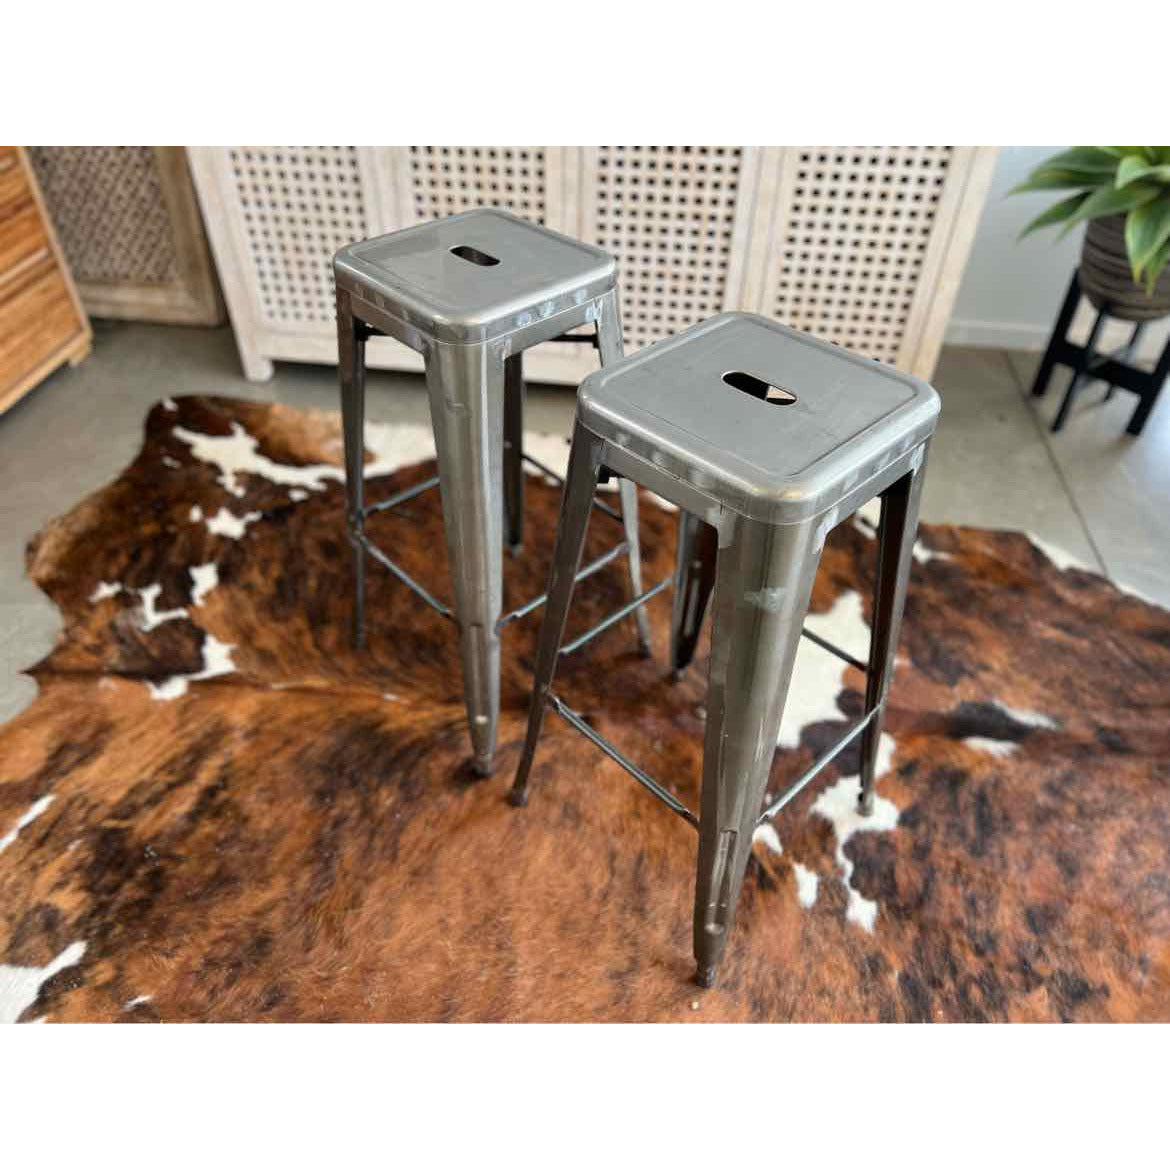 Pair of Metal Barstools - colletteconsignment.com